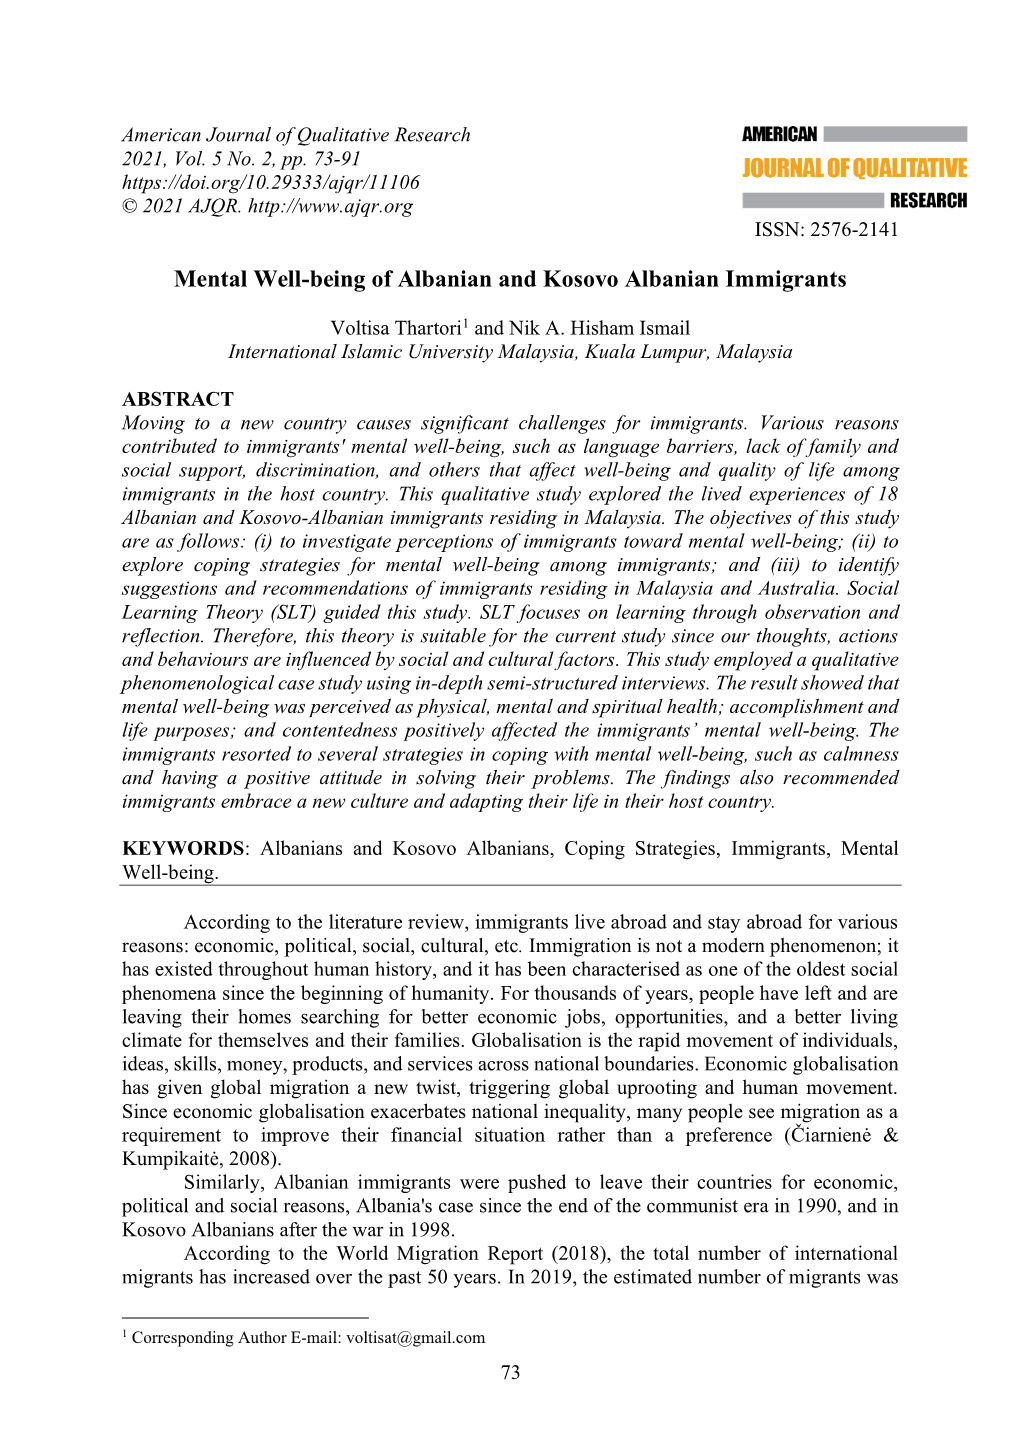 Mental Well-Being of Albanian and Kosovo Albanian Immigrants